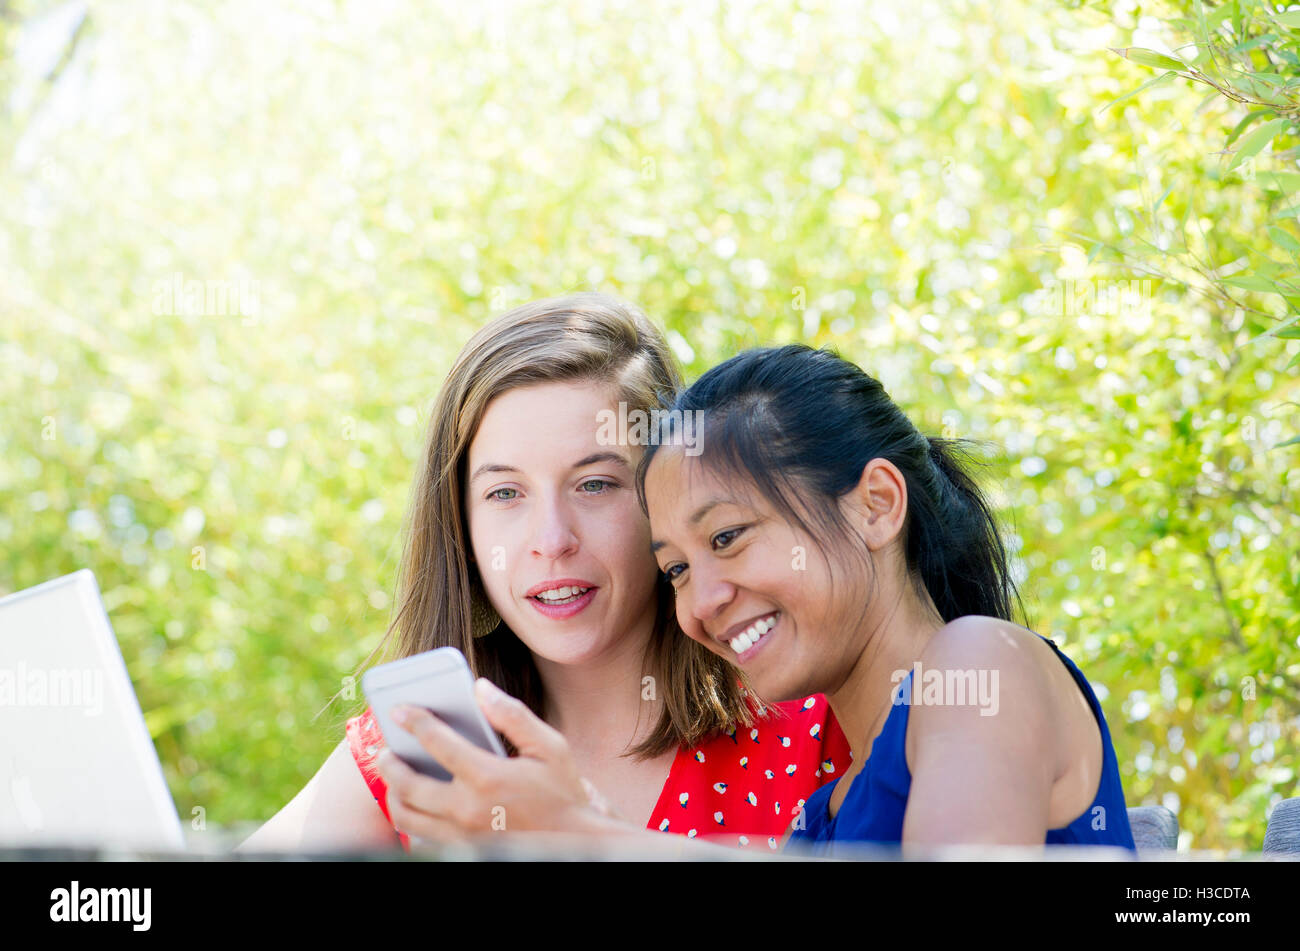 Women looking at smartphone together outdoors Stock Photo